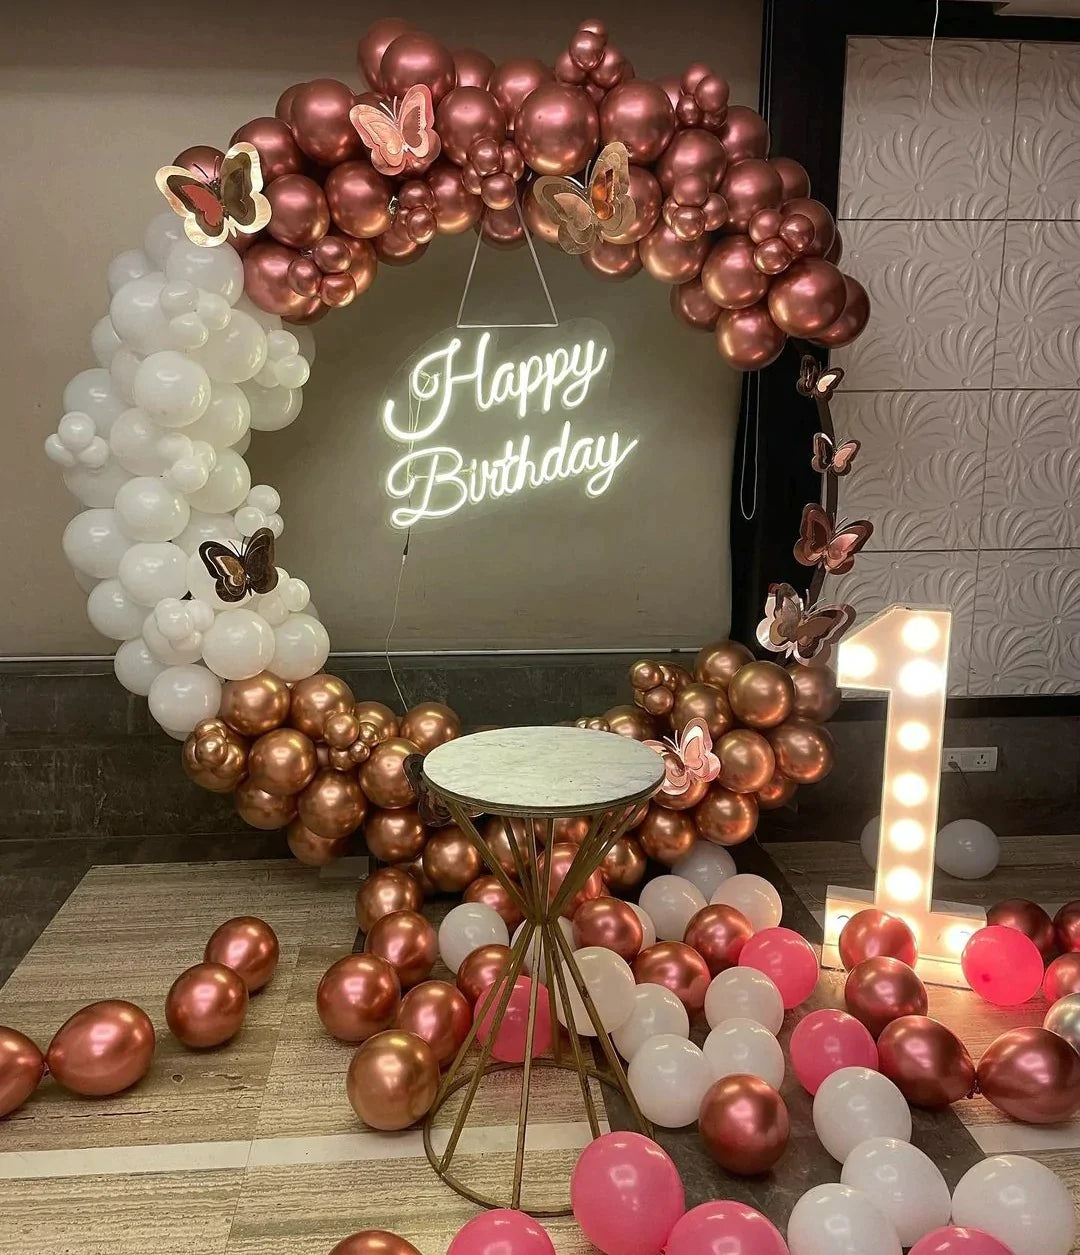 Butterfly Ring Decoration for Birthday, Hyderabad – ExperienceSaga.com